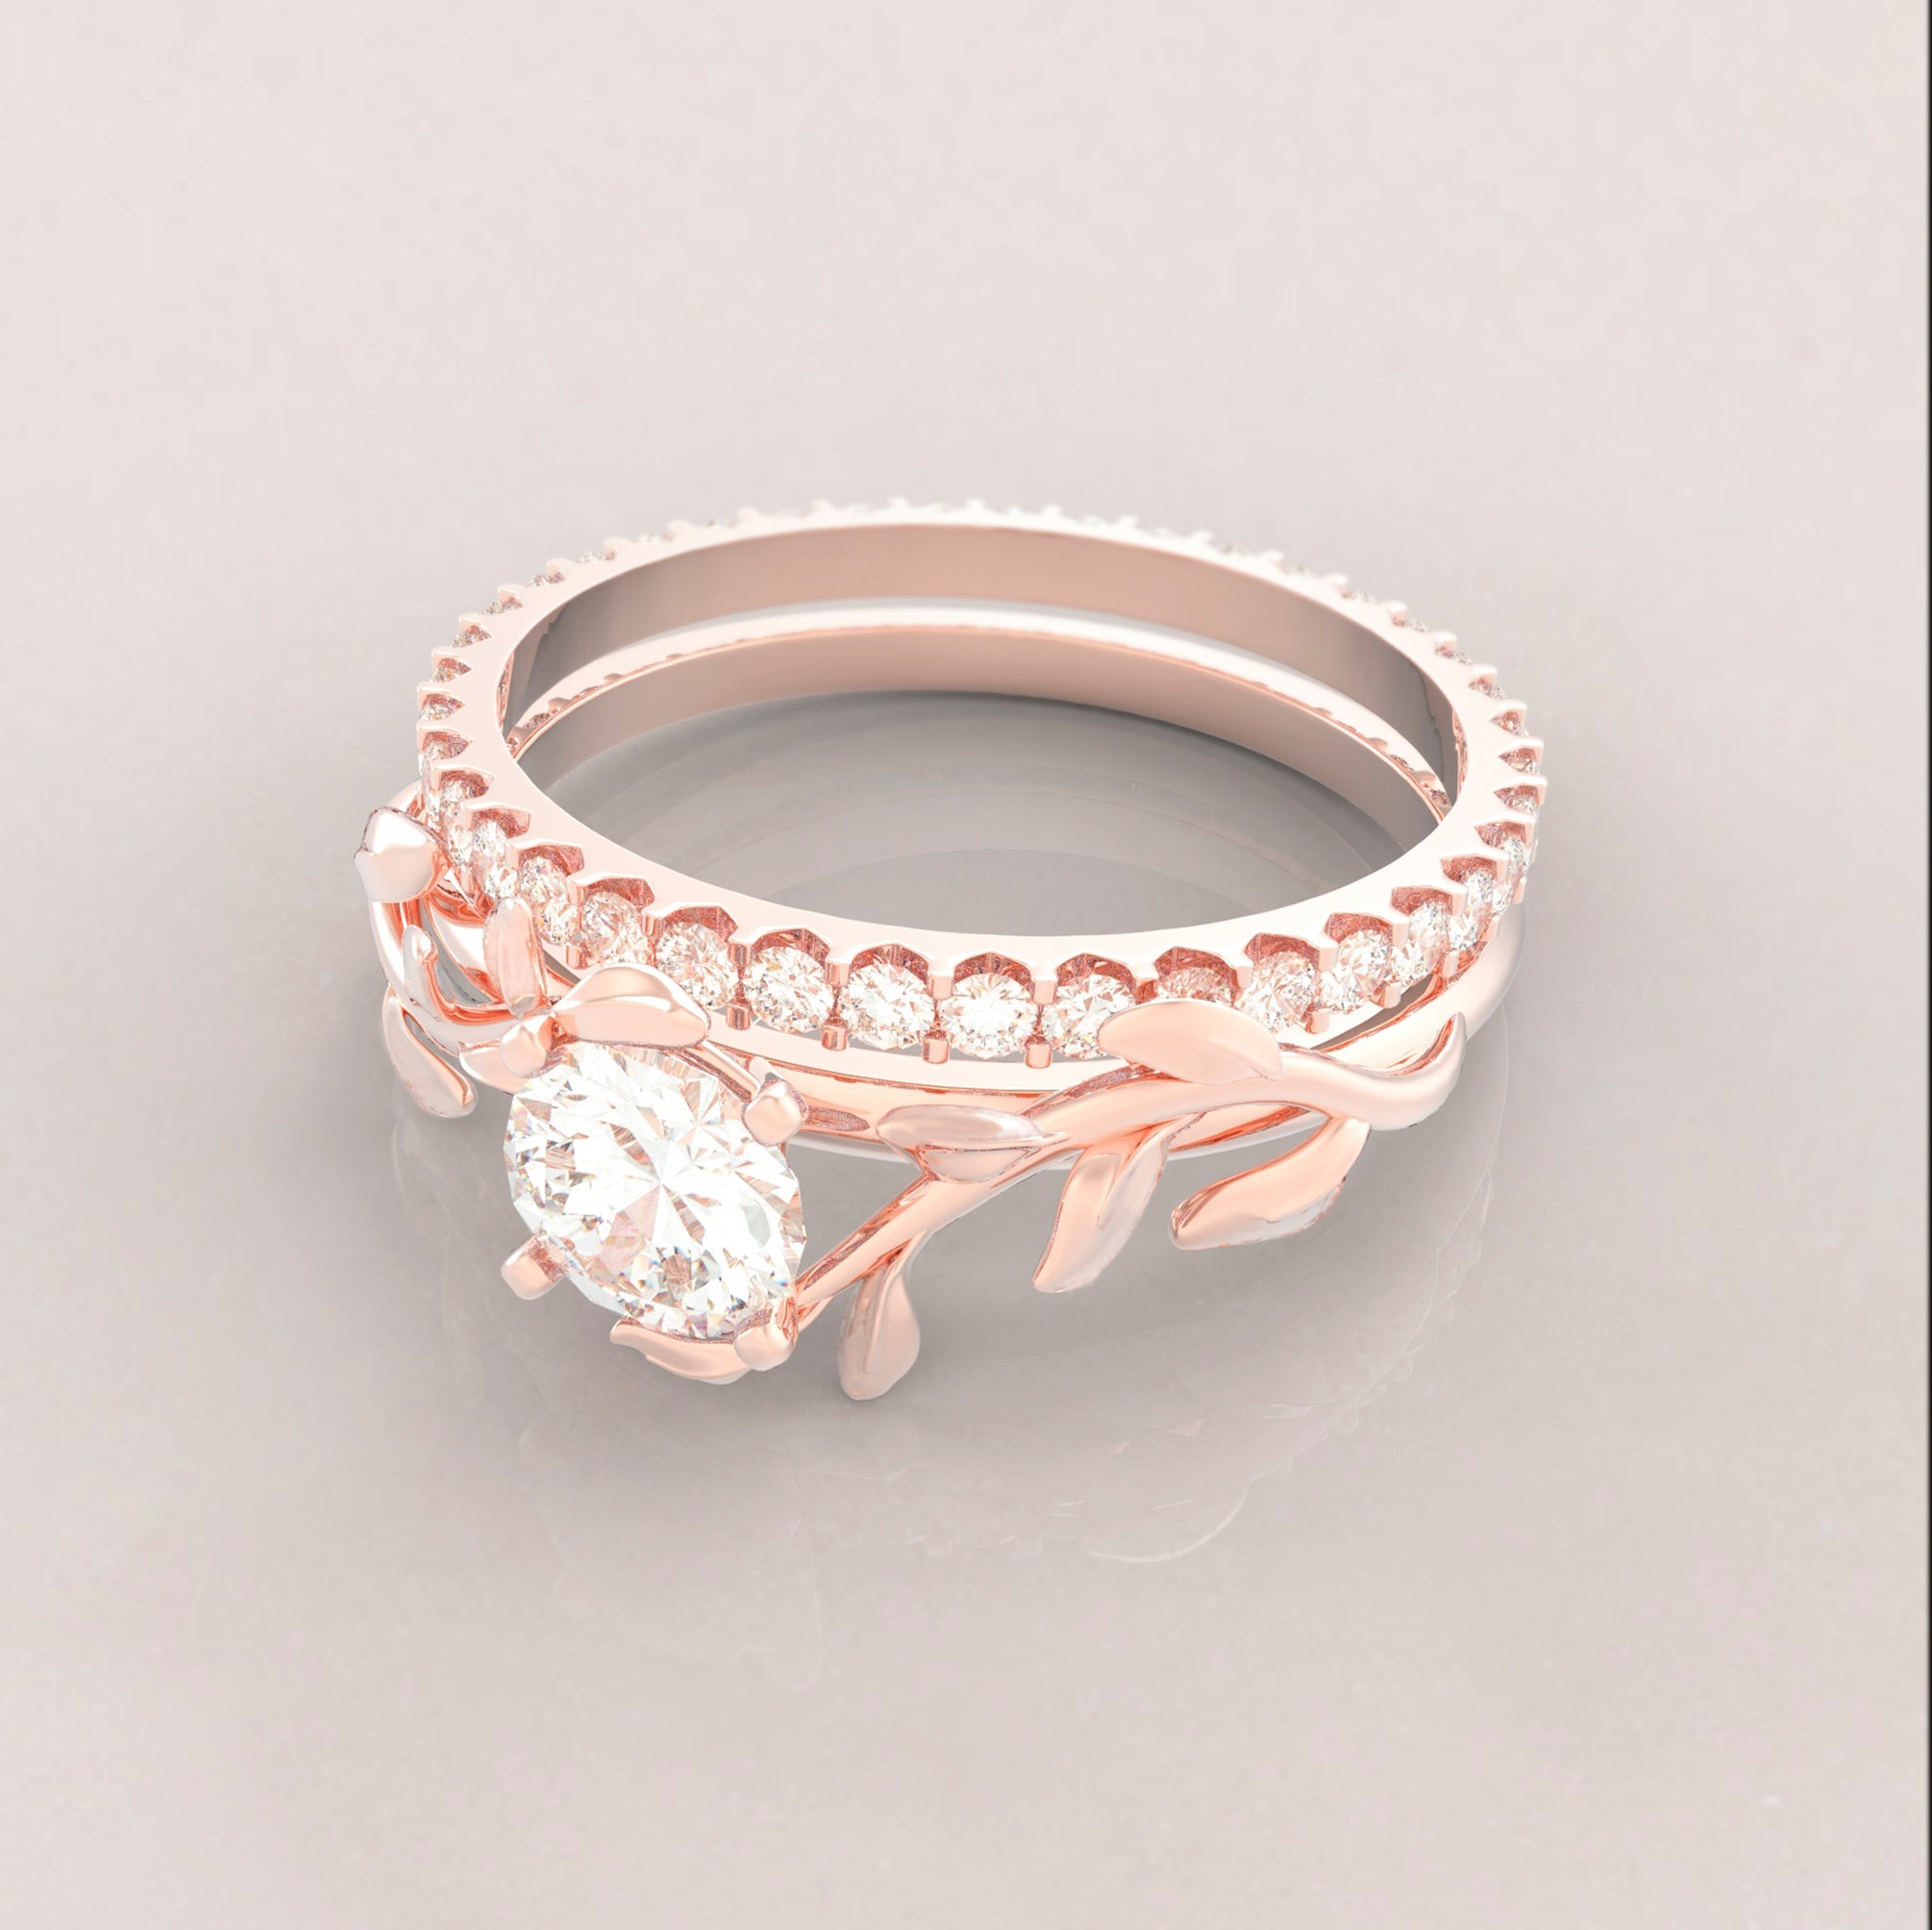 Unique Leaves Engagement and Eternity Wedding Engagement Ring Set No.5 in Rose Gold - Diamond/Moissanite - Roelavi